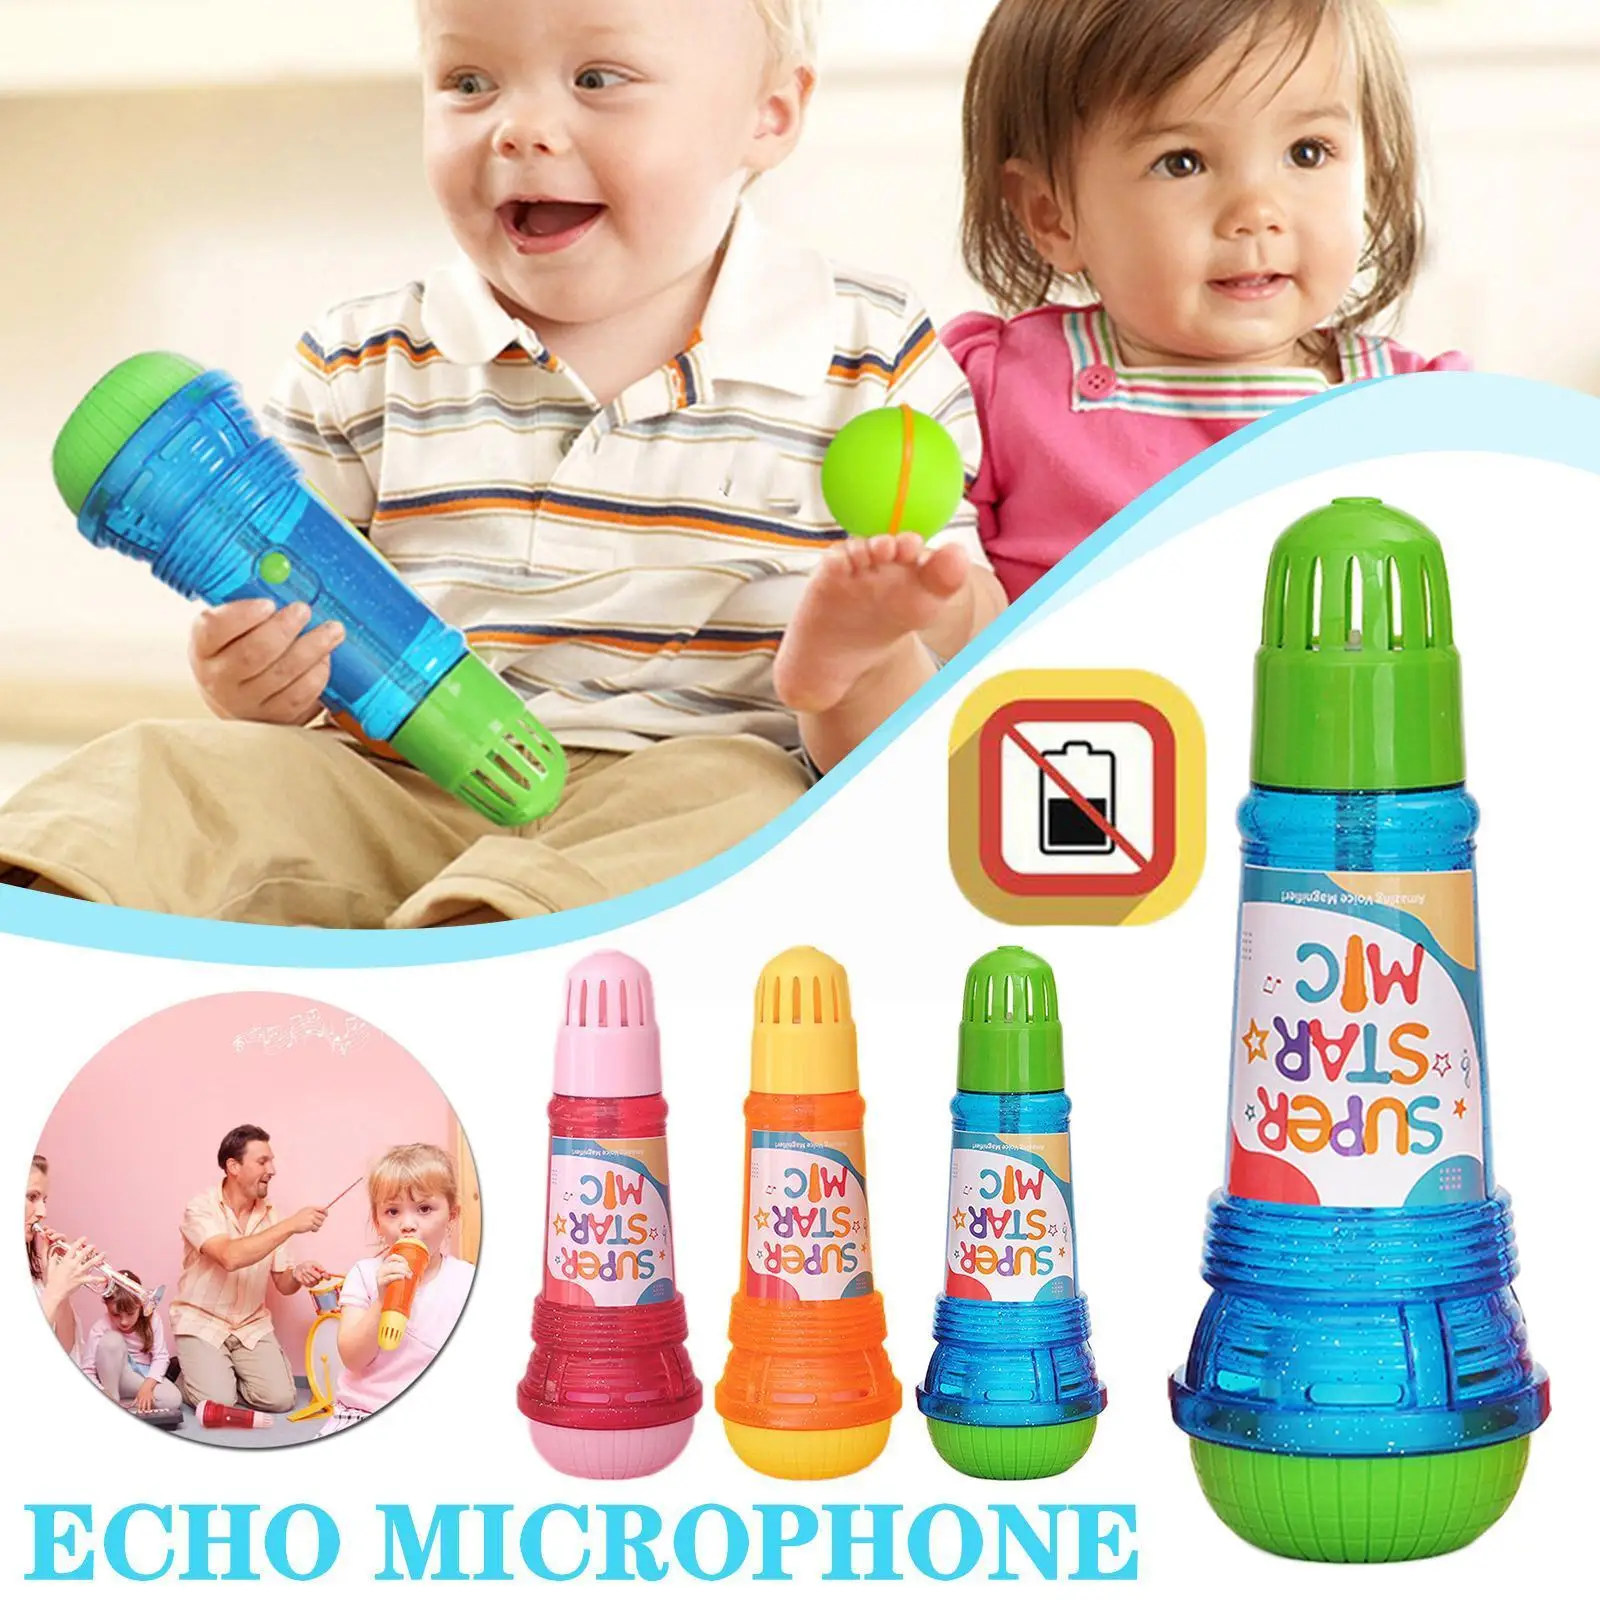 Kids Echo Mic Singing Microphone For Karaoke S Toddler Toddlers Musical Microphones Speech Music Voice Education Early G1P3